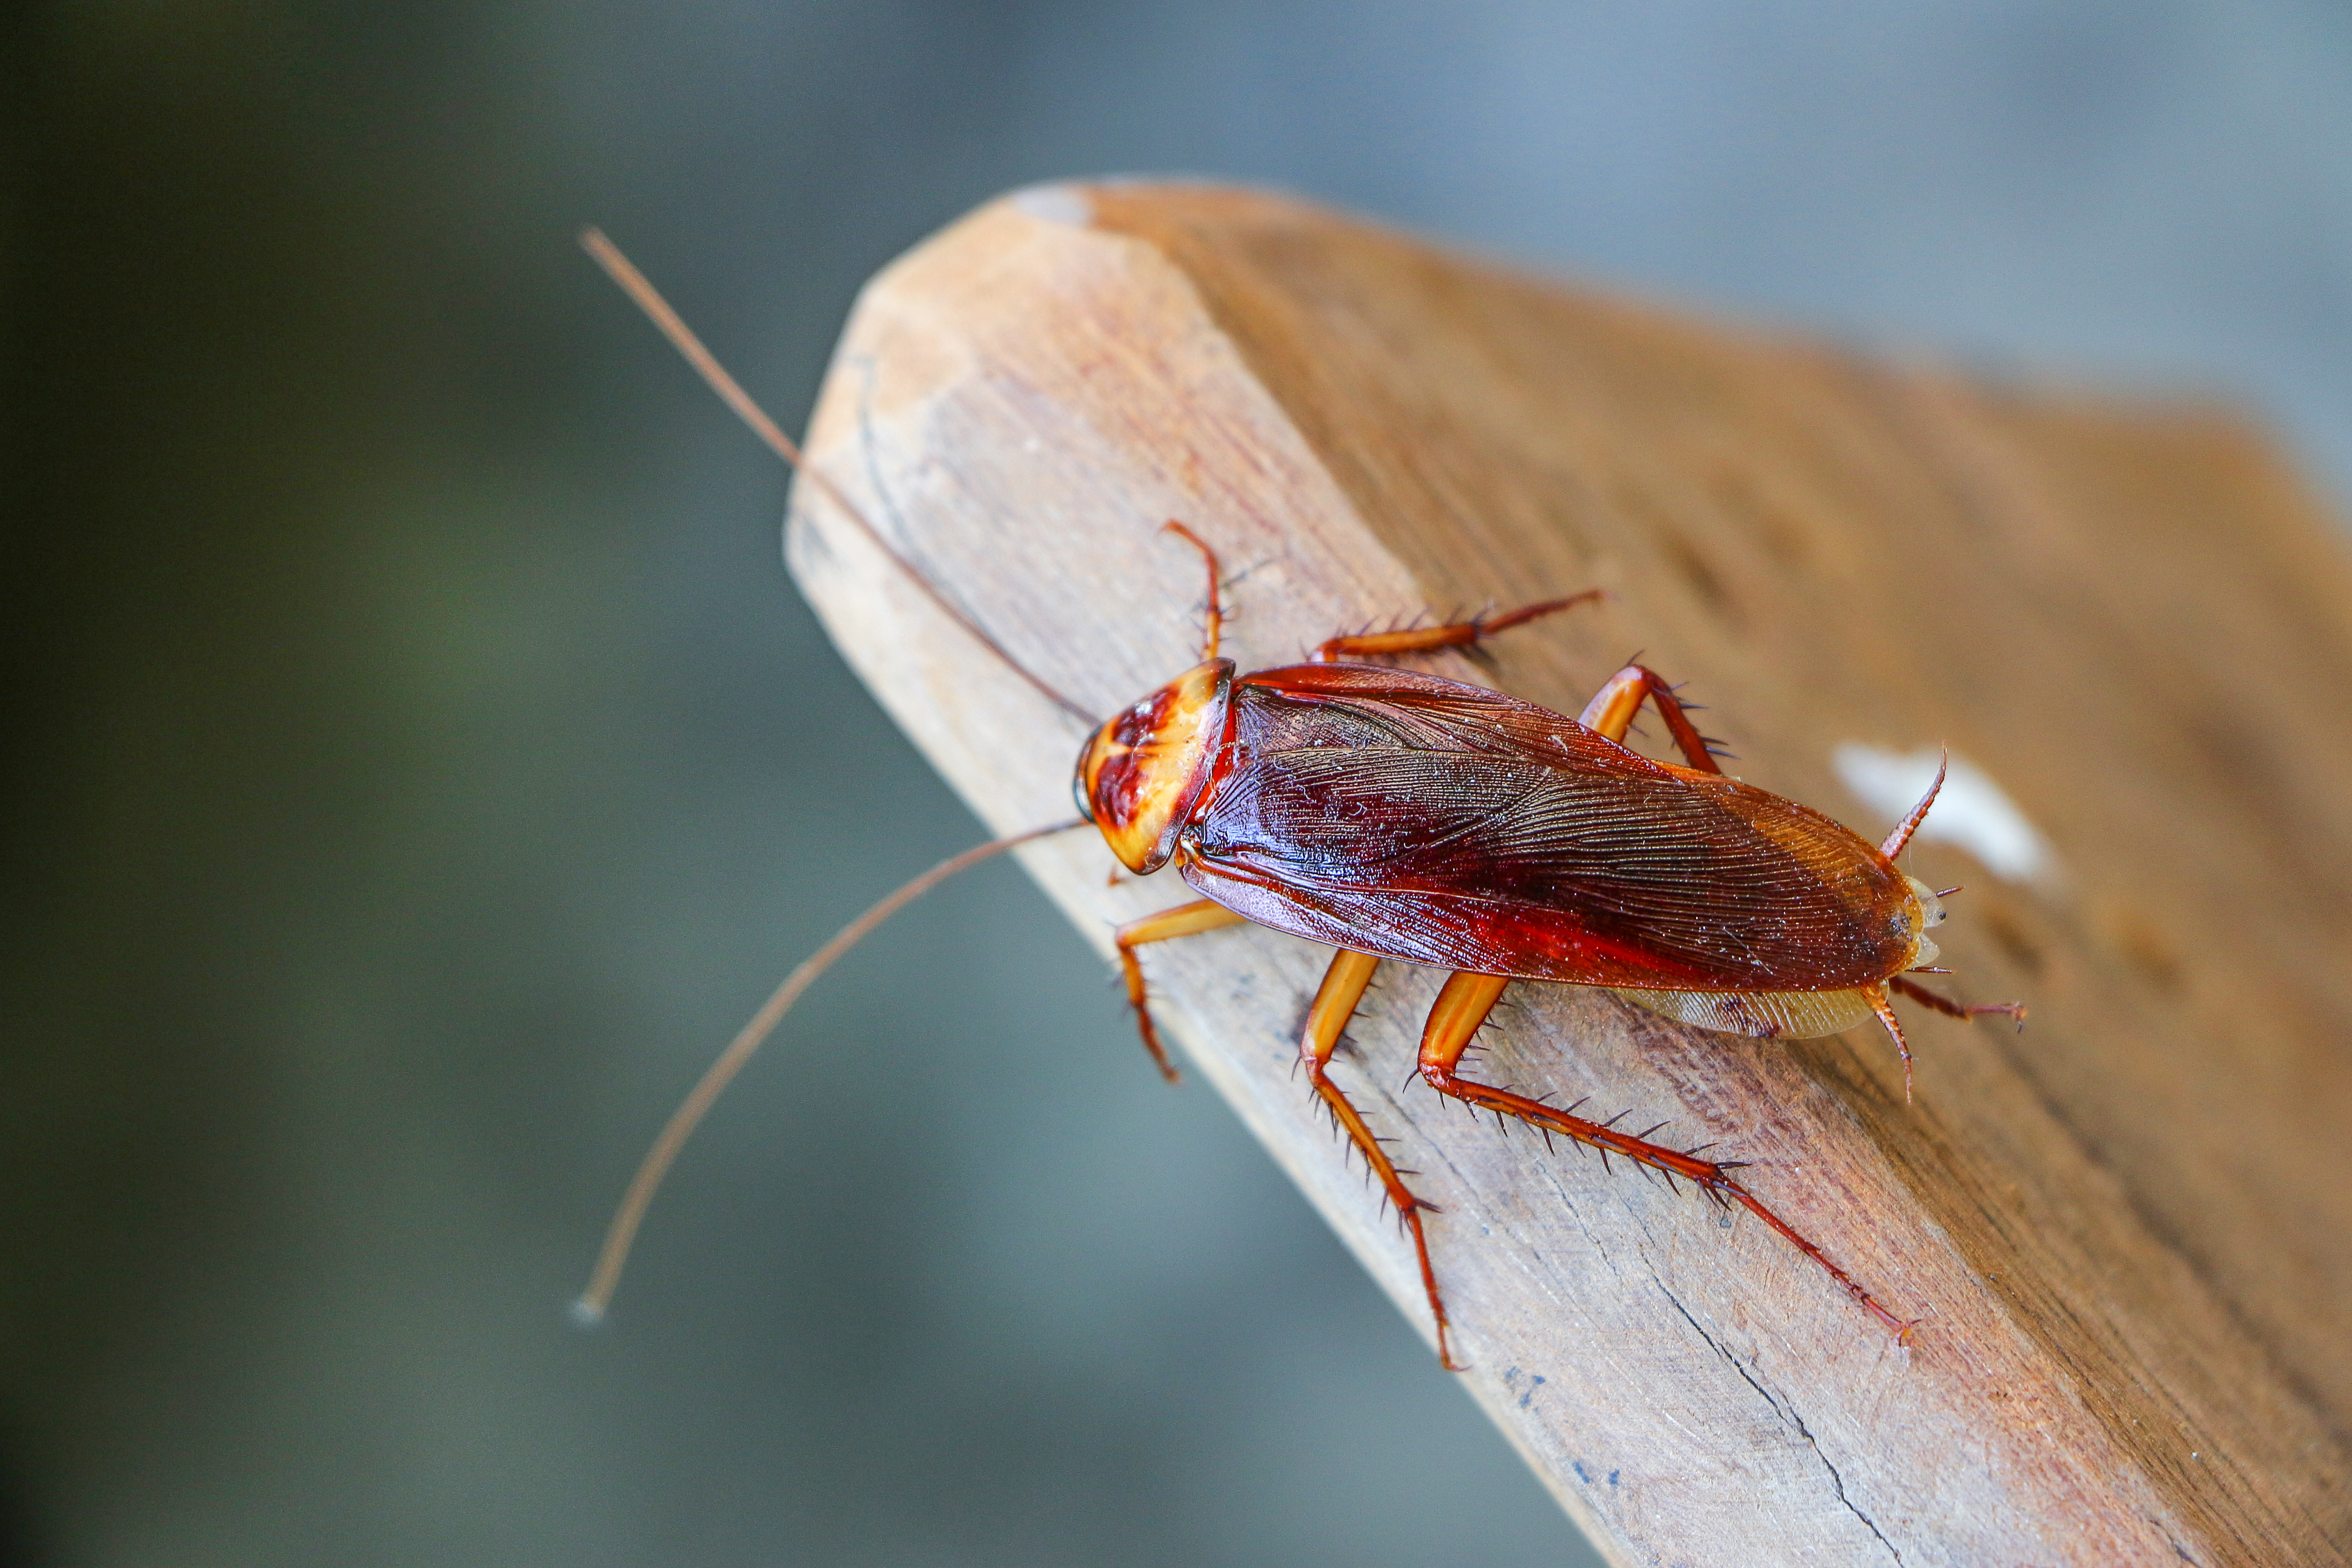 A cockroach on the wood | Source: Shutterstock